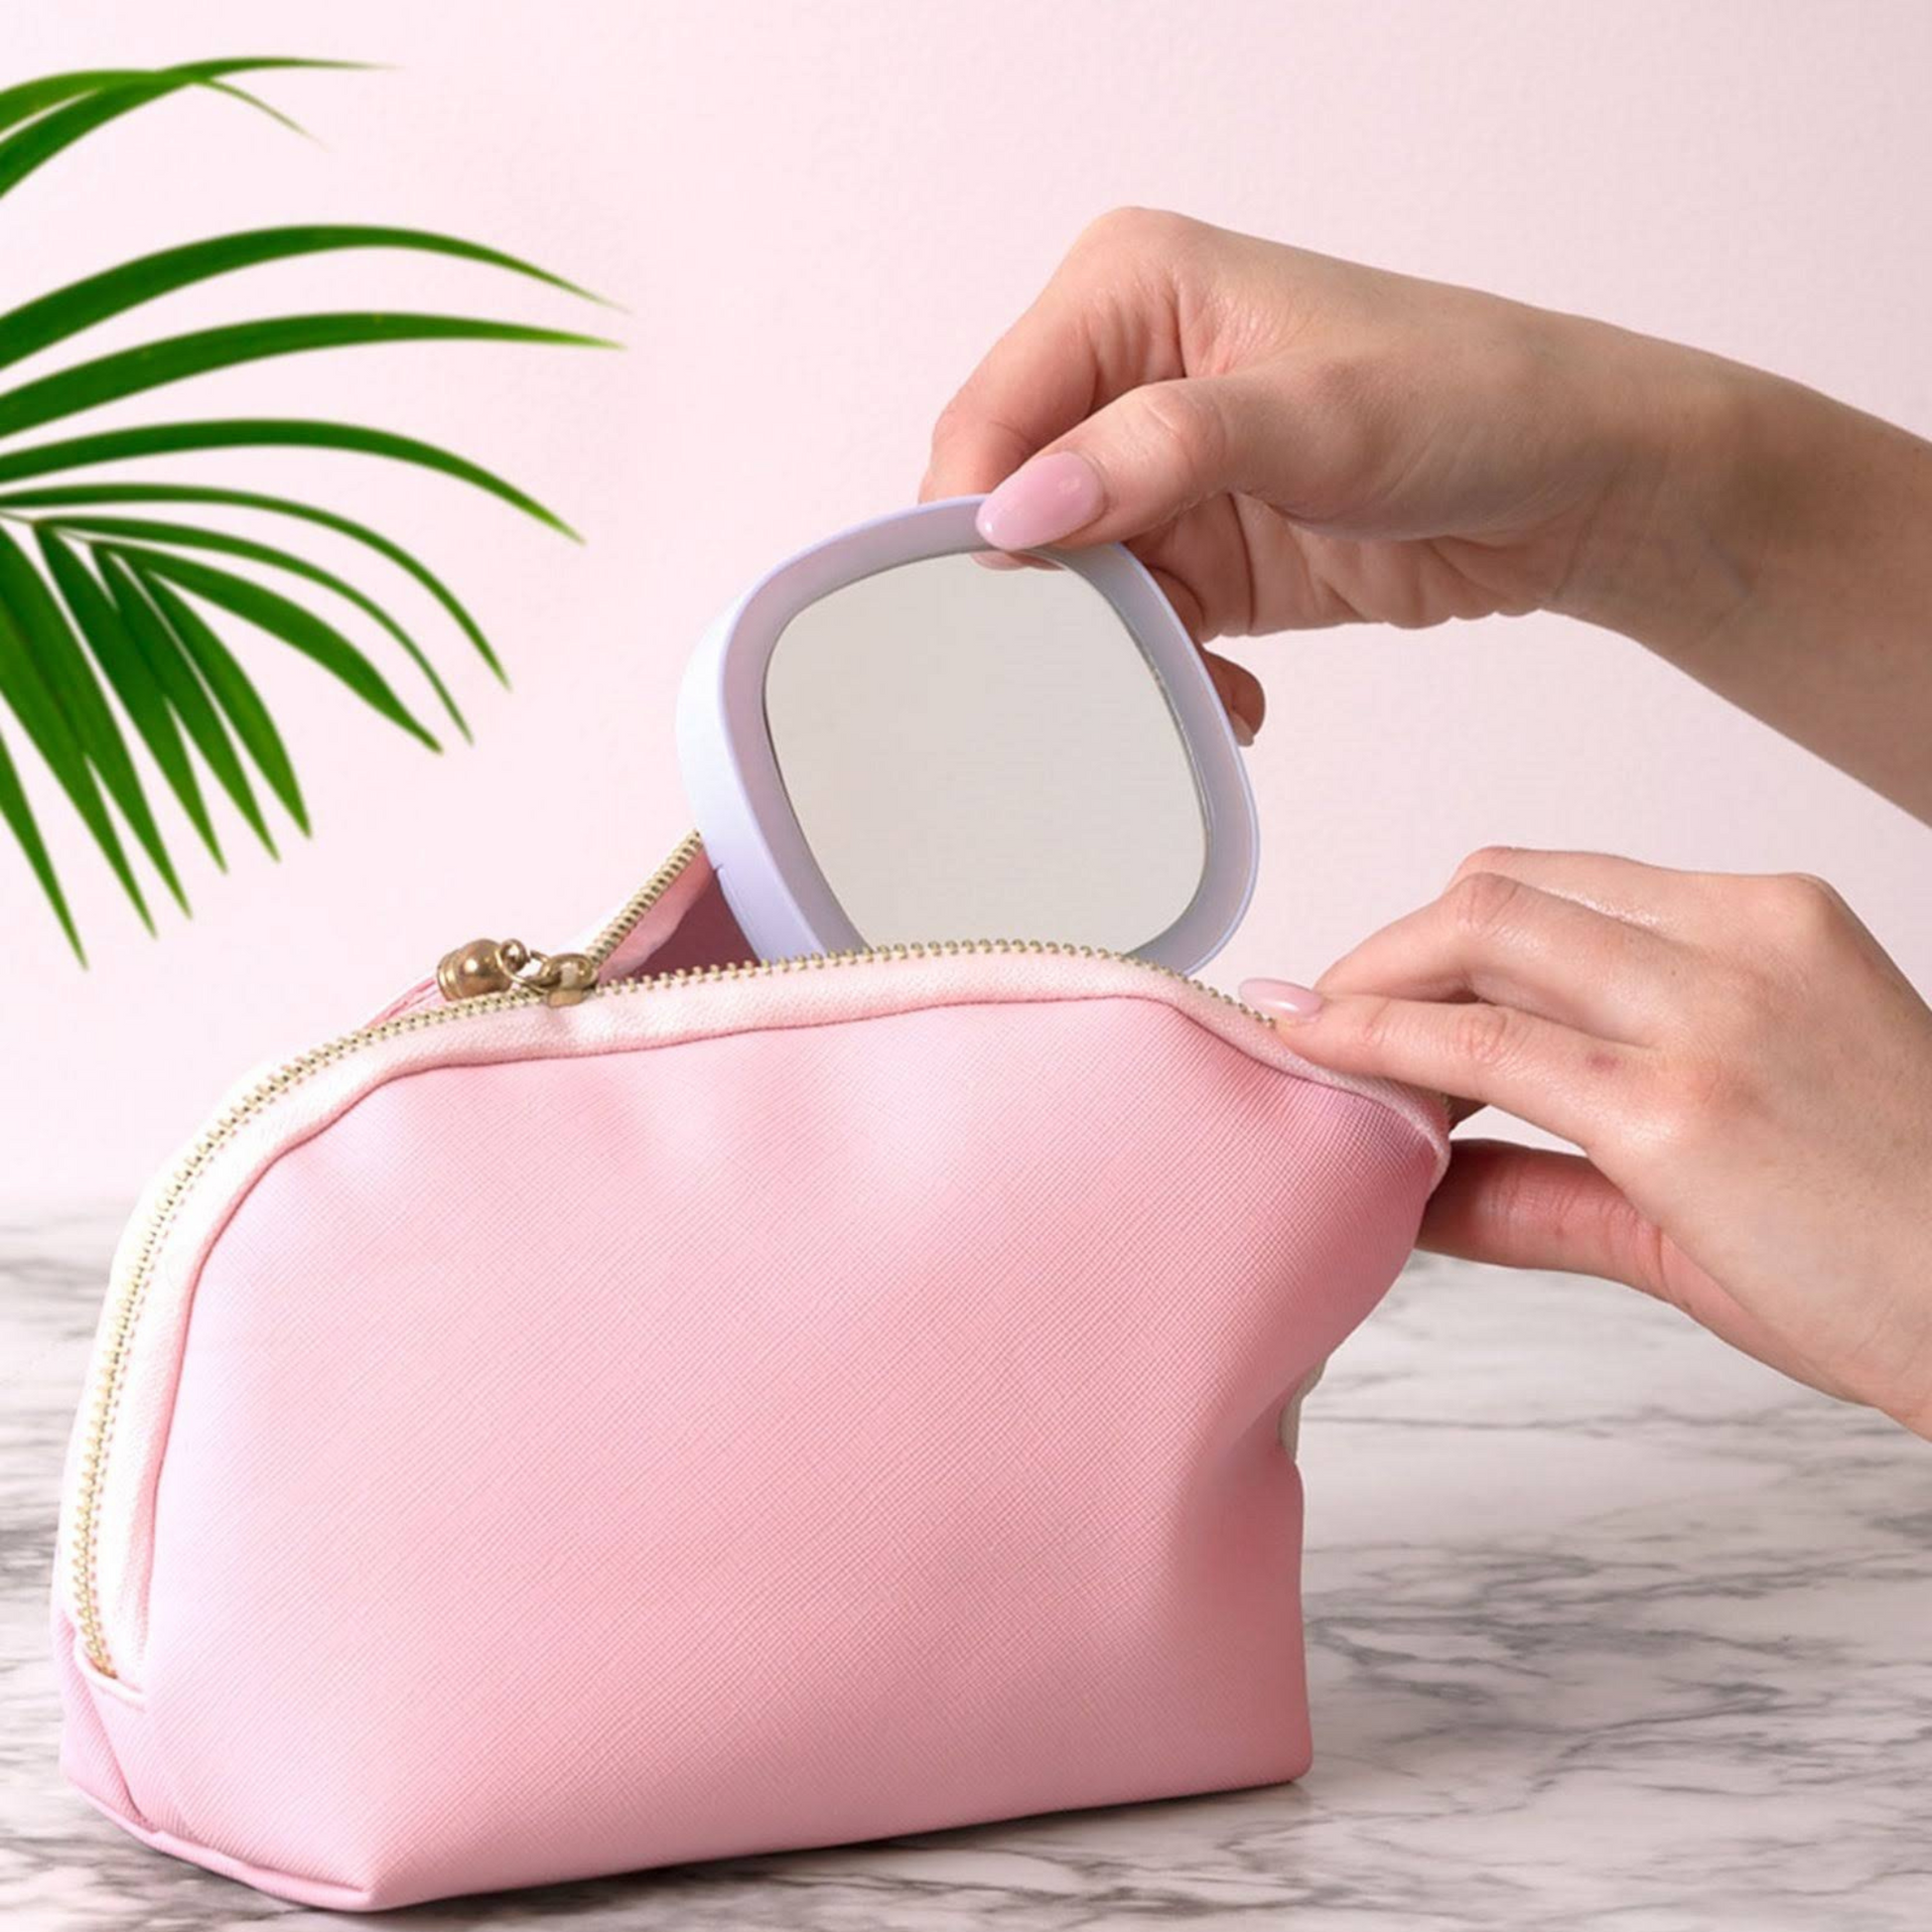 Mini LED makeup mirror. Perfect for travel